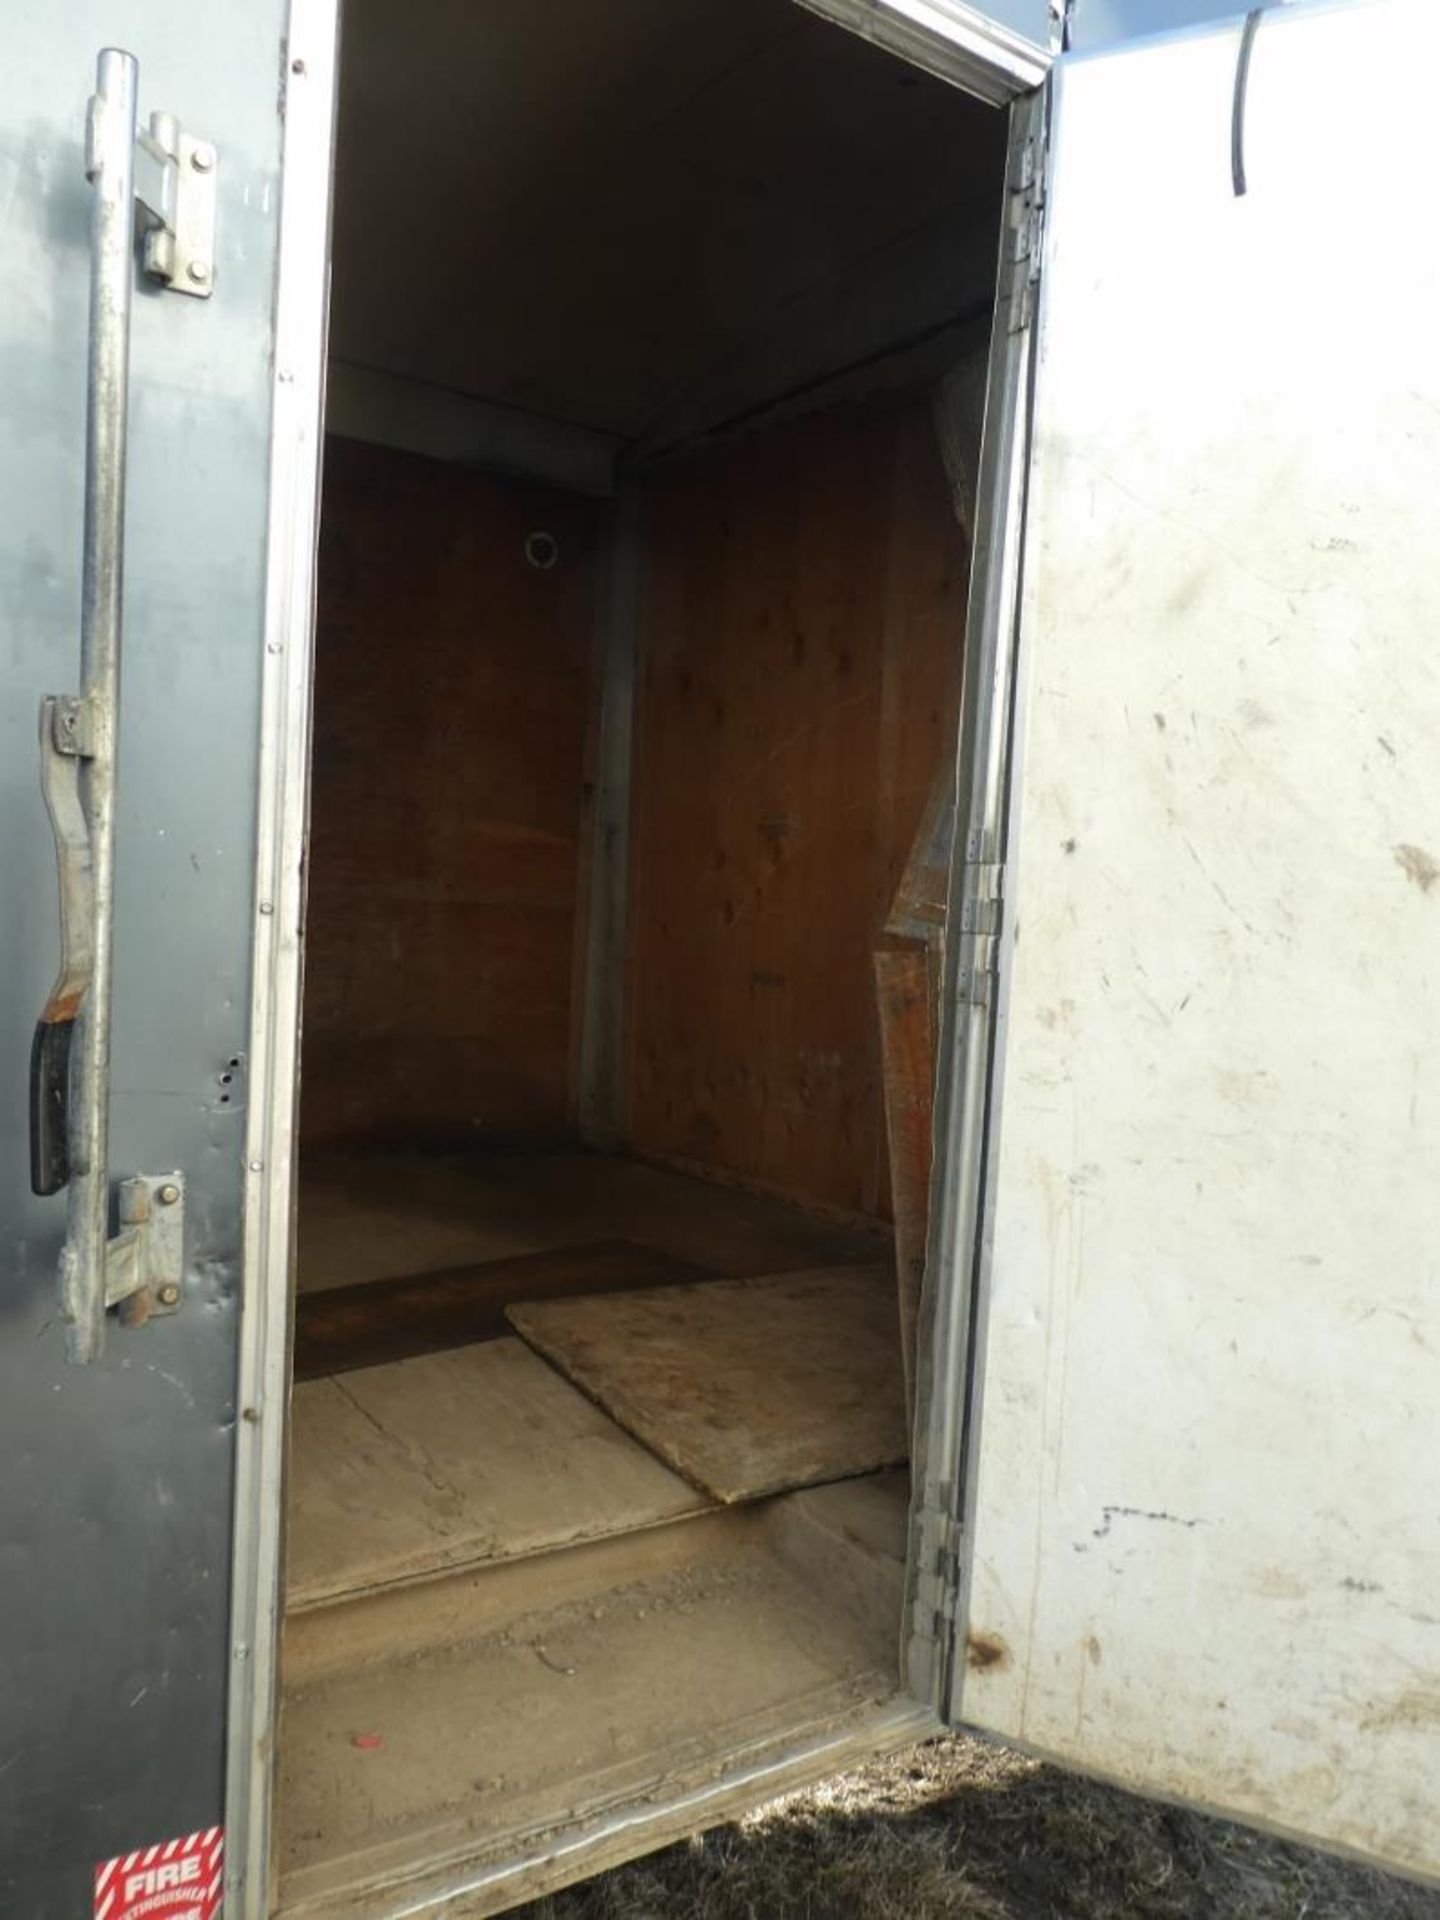 04/2012 TNT TRAILER - 20 FT T/A ENCLOSED TRAILER W/REAR BARN DOORS, S/N 5WBBE20226CW0058005 - Image 6 of 7